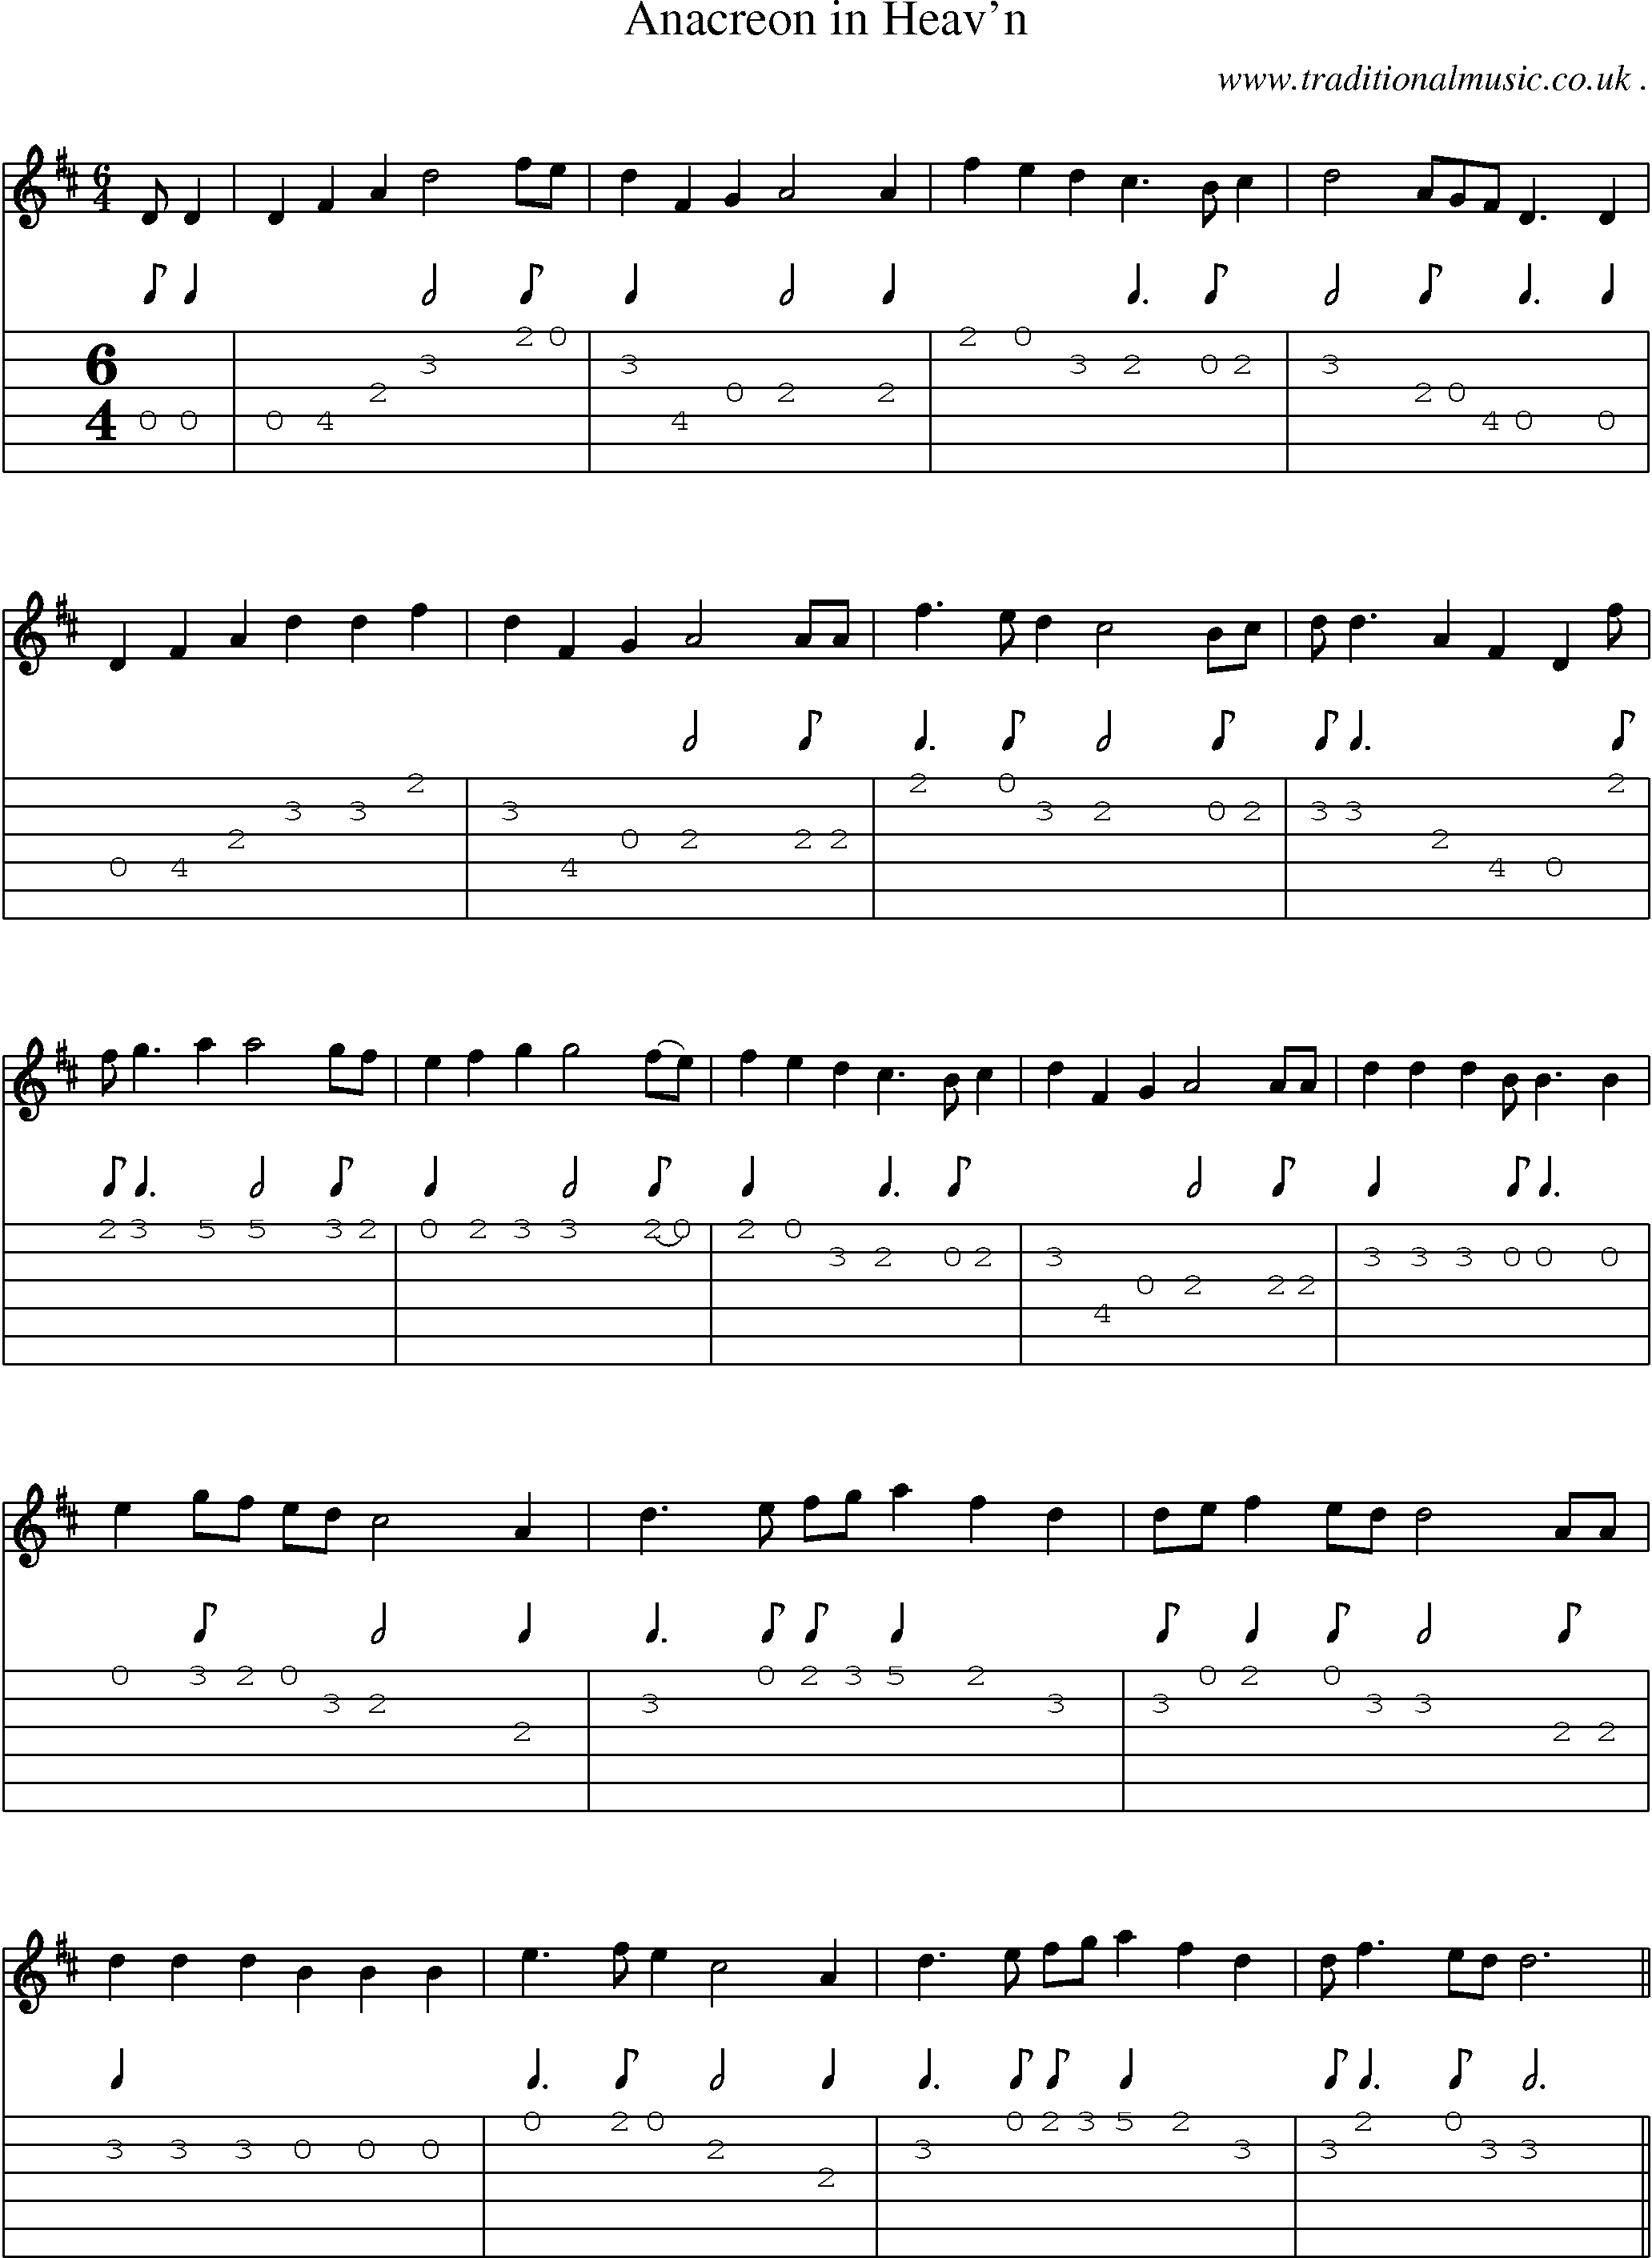 Sheet-Music and Guitar Tabs for Anacreon In Heavn